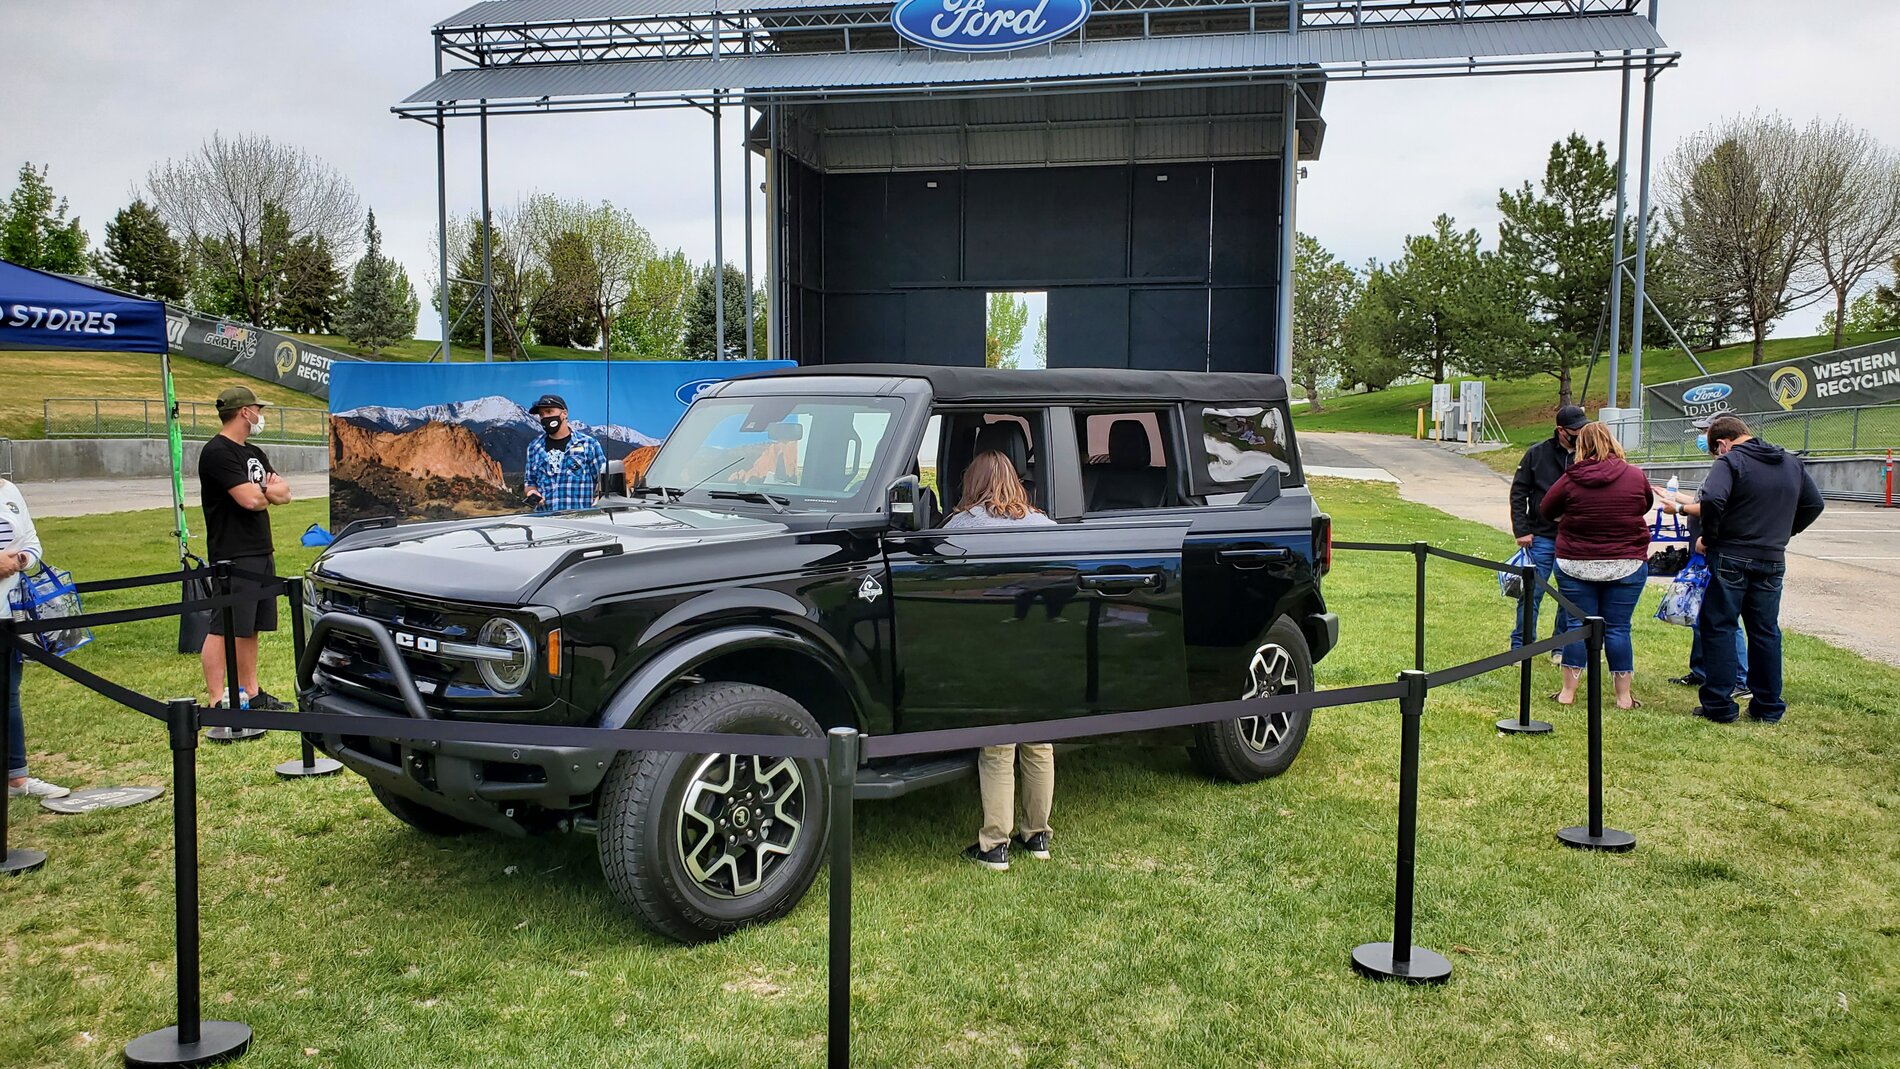 Ford Bronco Idaho Bronco show if you can call it that 20210501_122955